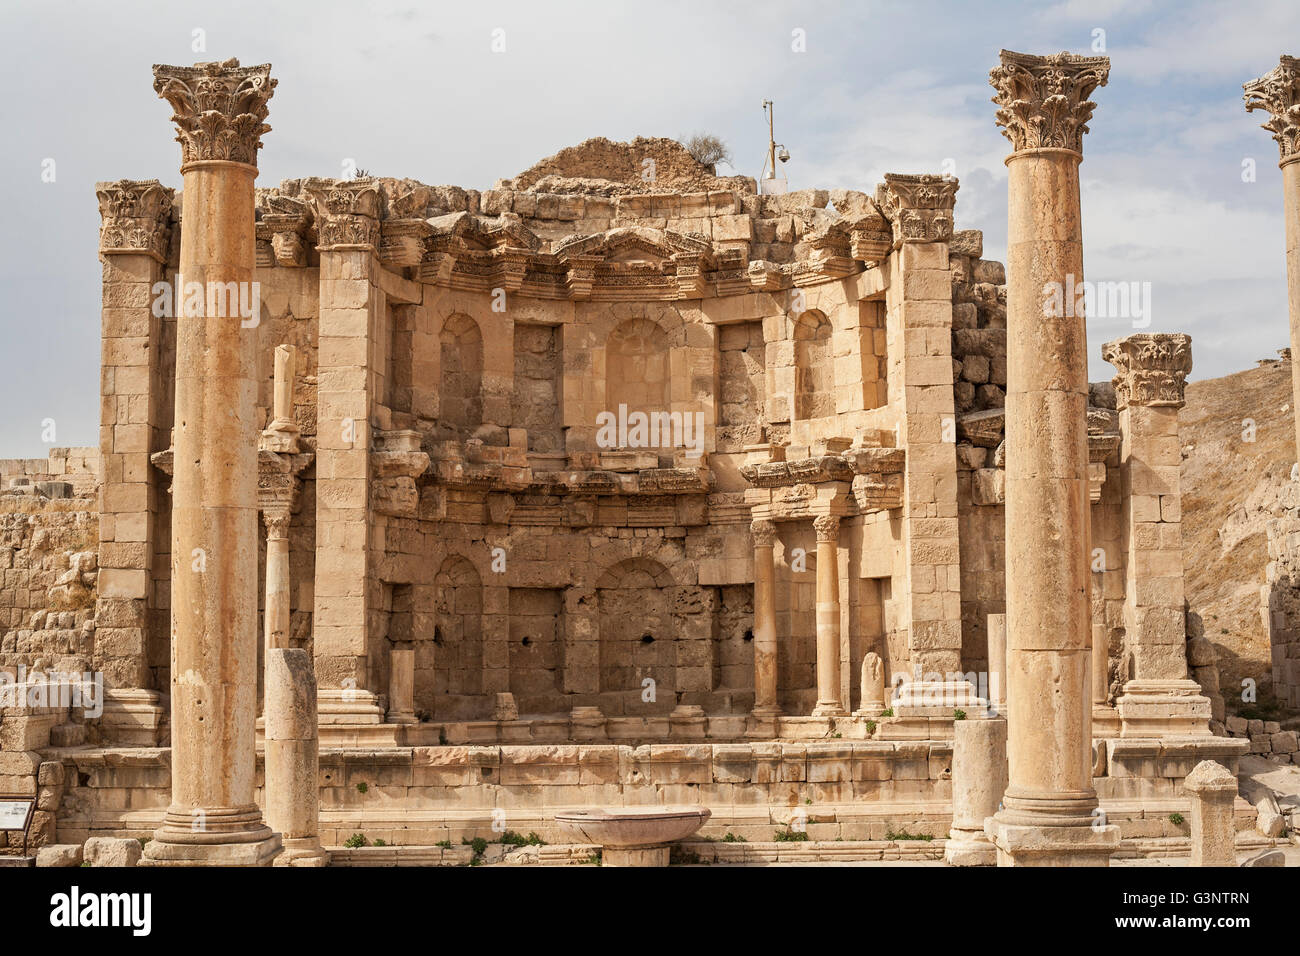 The Roman ruins at Jerash in Jordan. The Nymphaeum, a public fountain built  by the Romans in 190 A.D Stock Photo - Alamy